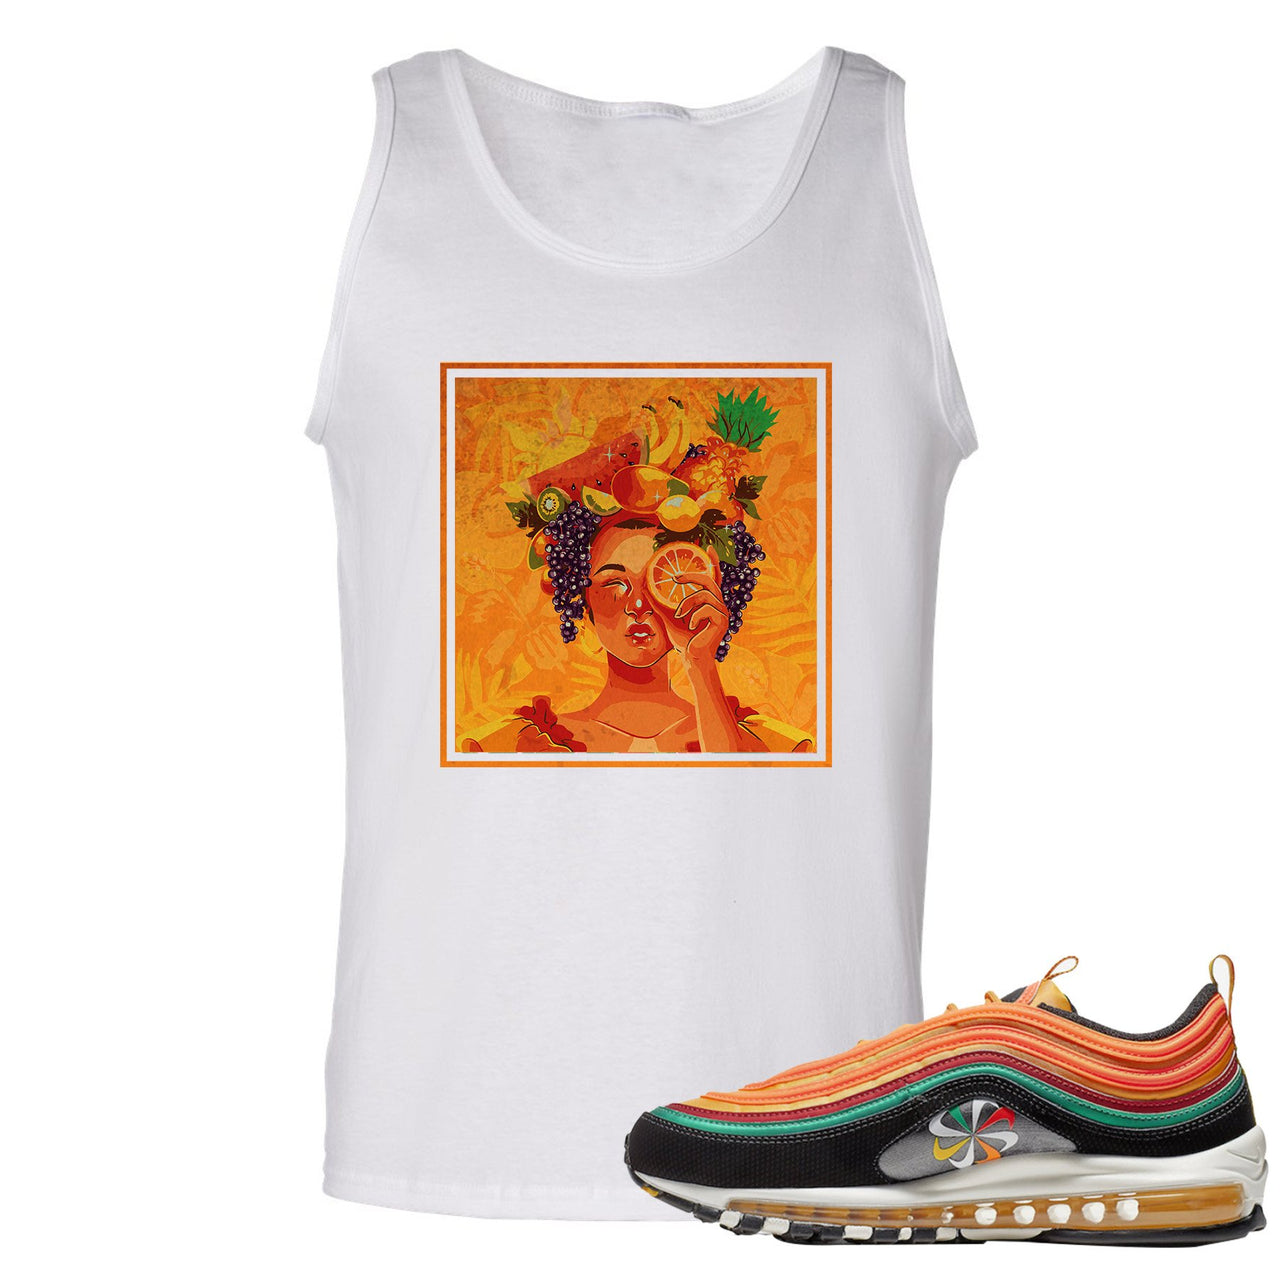 Printed on the front of the Air Max 97 Sunburst white sneaker matching tank top is the Lady Fruit logo